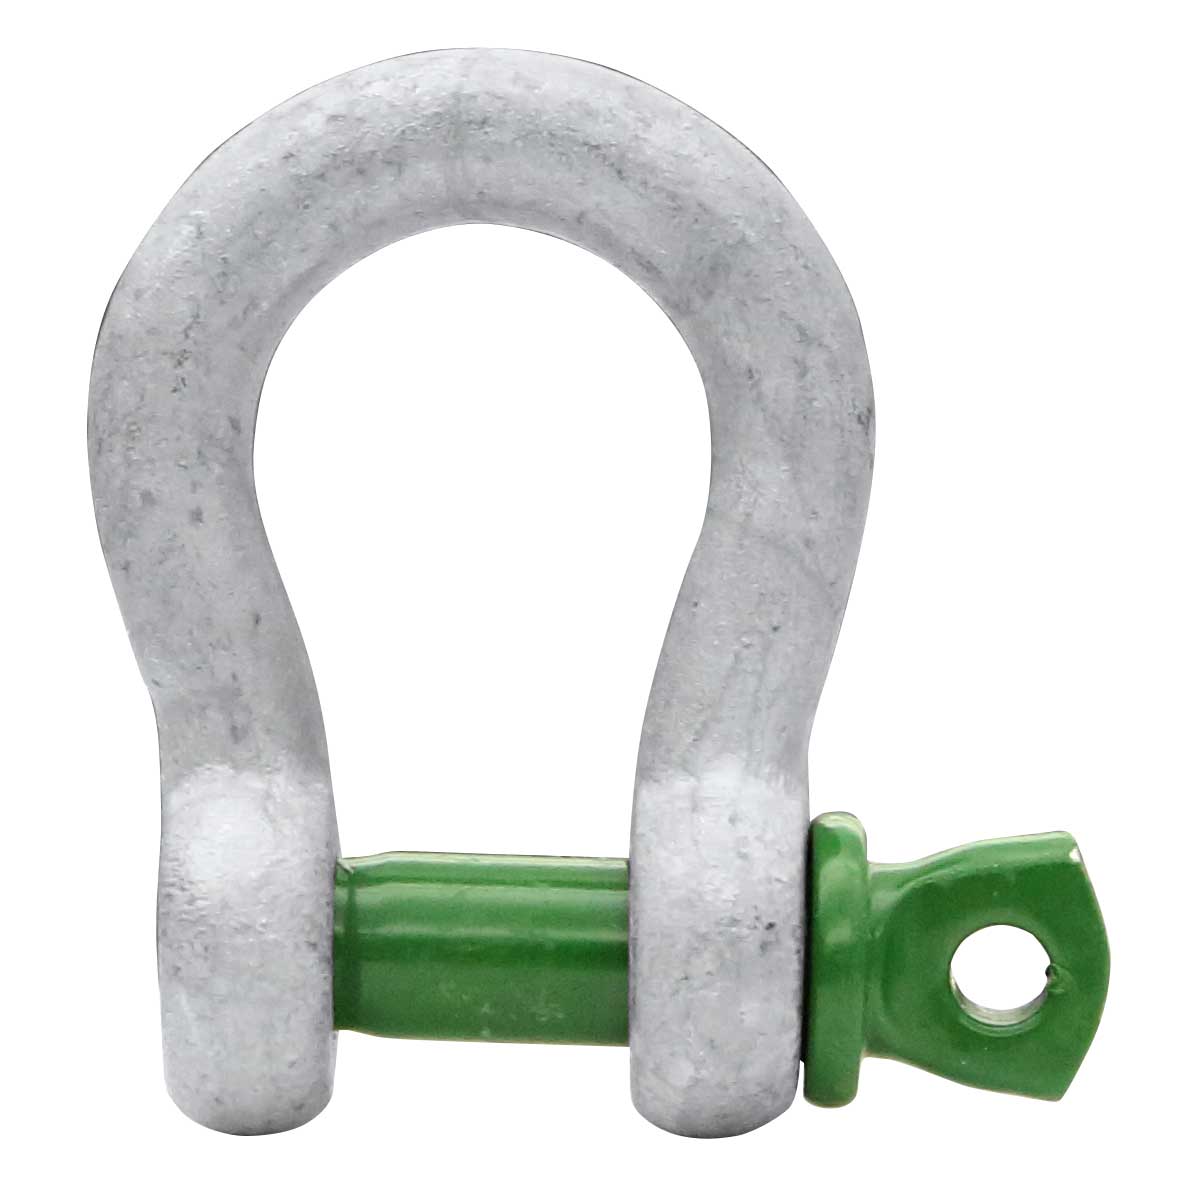 5/8" Van Beest Green Pin® Screw Pin Anchor Shackle | G-4161 - 3.25 Ton primary image